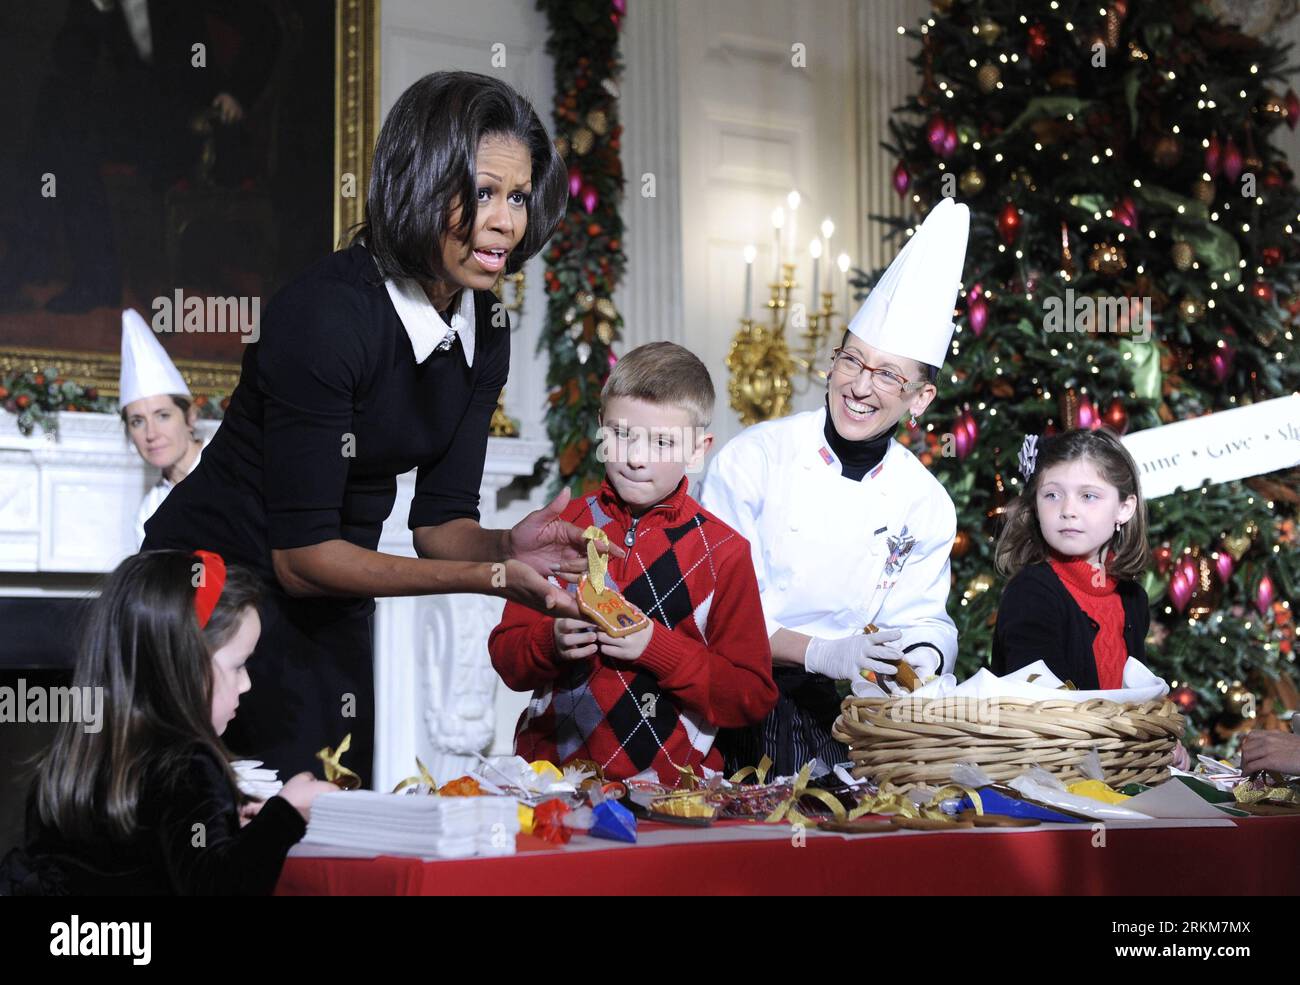 Bildnummer: 56537170  Datum: 30.11.2011  Copyright: imago/Xinhua (111130) -- WASHINGTON, Nov. 30, 2011 (Xinhua) -- U.S. first lady Michelle Obama shows her handmade cookie Christmas ornament while hosting children of active duty military service members in the State Dining Room during the press preview of the Christmas decorations at the White House in Washington D.C., capital of the United States, Nov. 30, 2011. (Xinhua/Zhang Jun) U.S.-WASHINGTON-WHITE HOUSE-CHRISTMAS-DECORATIONS PUBLICATIONxNOTxINxCHN People Gesellschaft Weihnachten Deko Weihnachtsdeko USA Weisses Haus xbs x2x 2011 quer prem Stock Photo